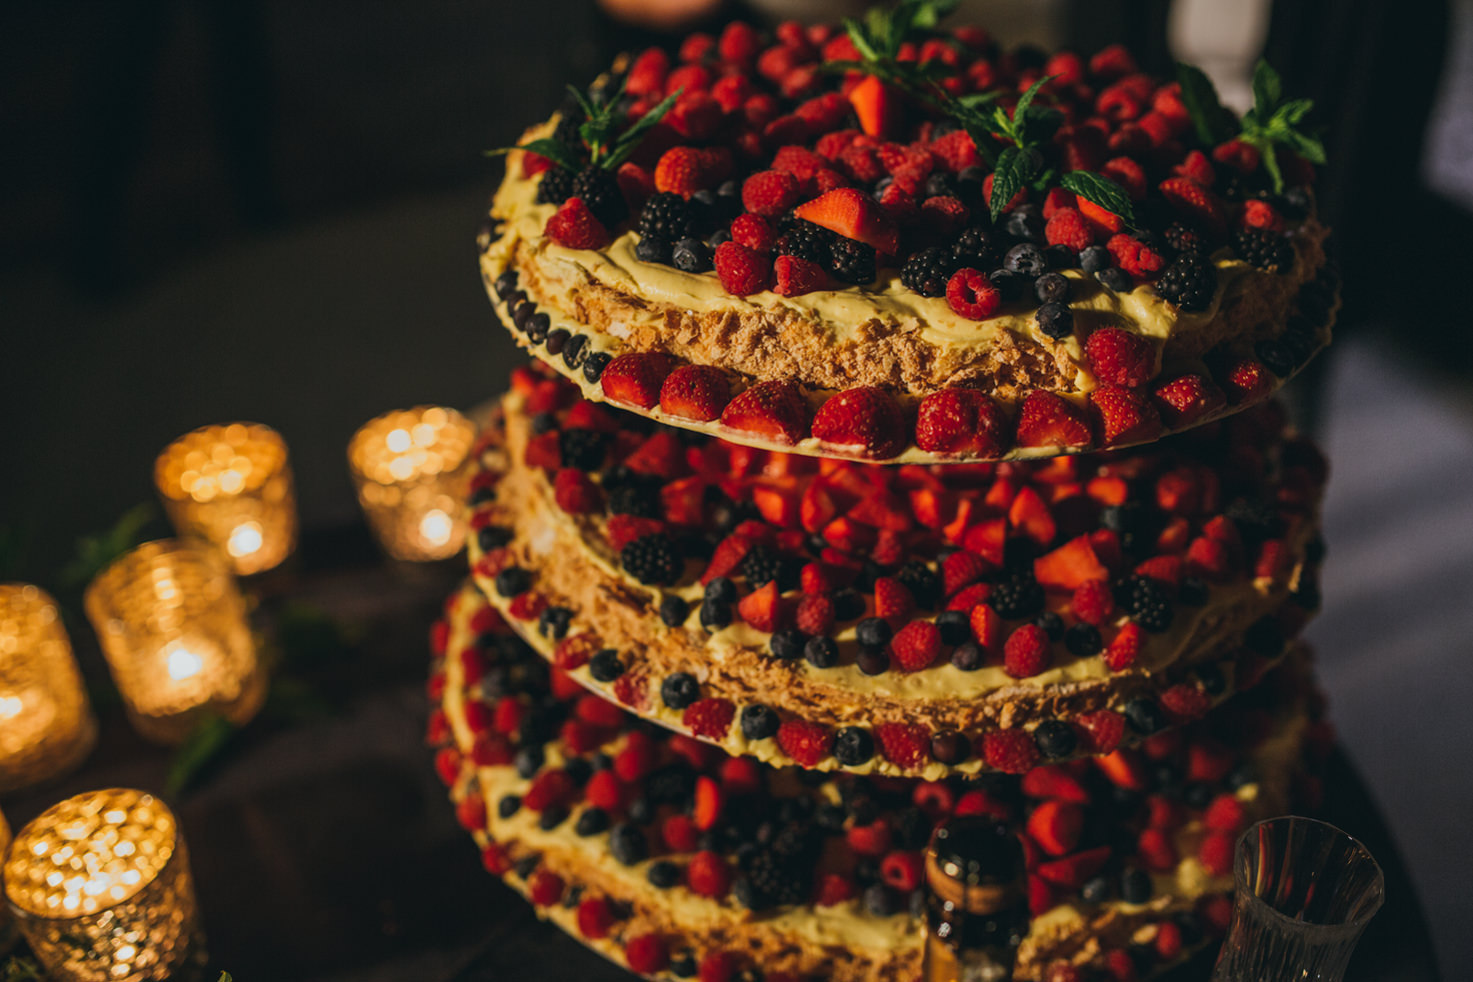 Wedding cake with red fruits